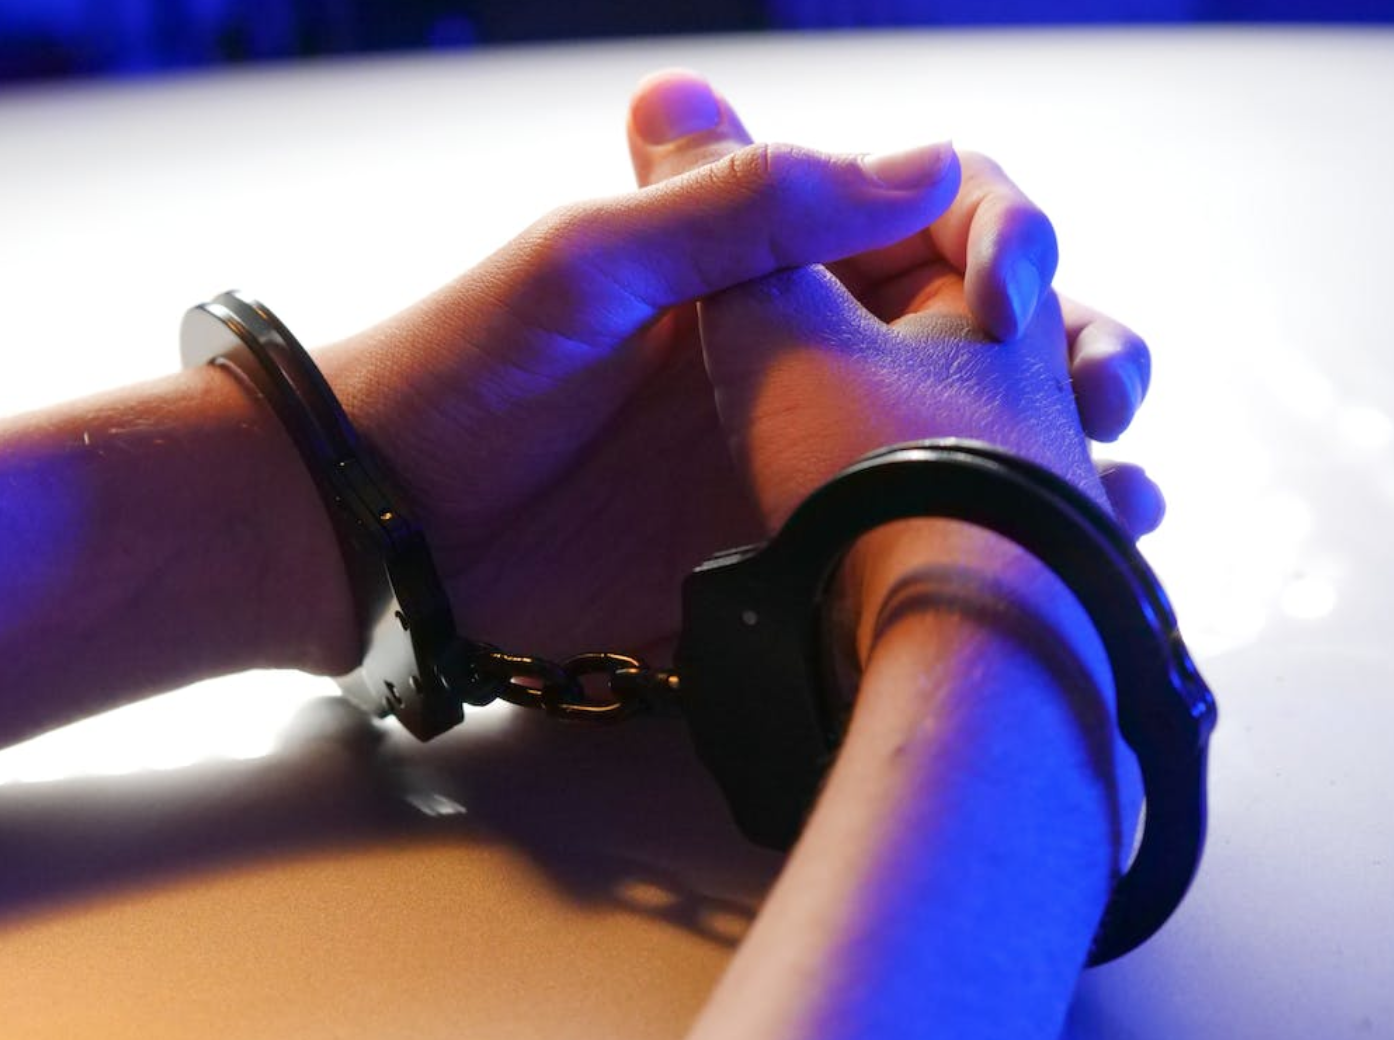 Person in handcuffs resting hands on table; image by Kindel Media, via Pexels.com.